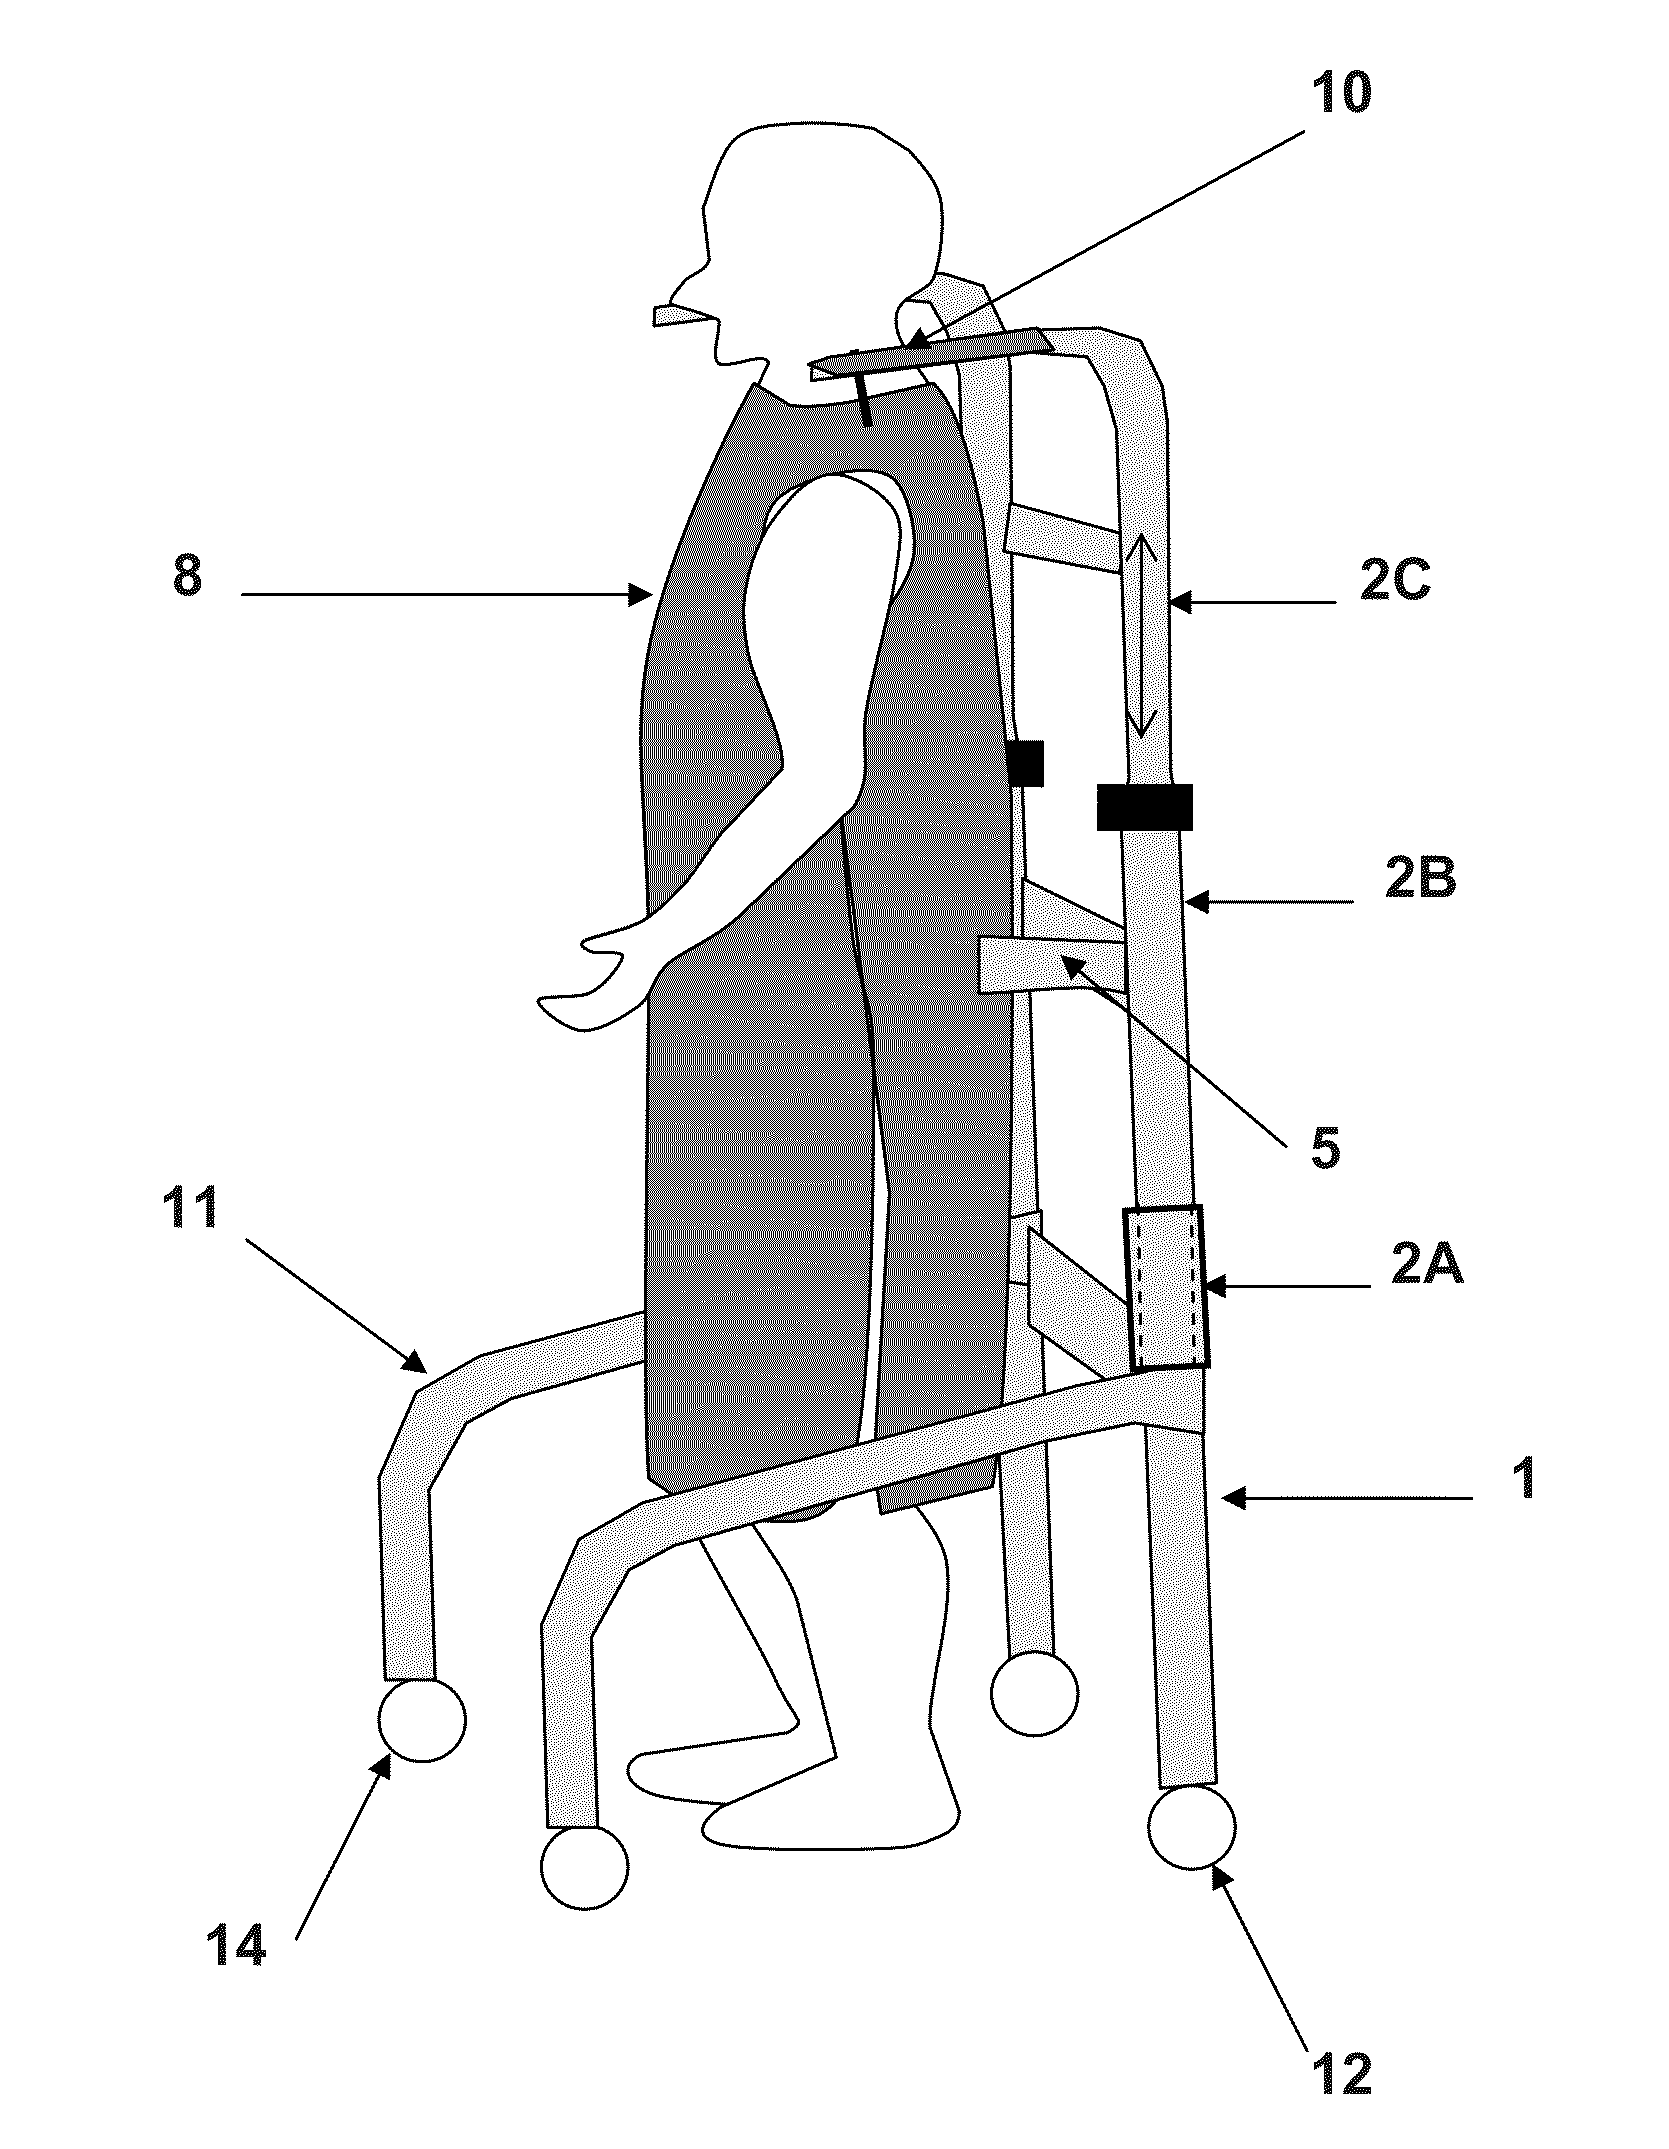 Practical design for a walk-around, hands-free radiation protective shielding garment suspension apparatus